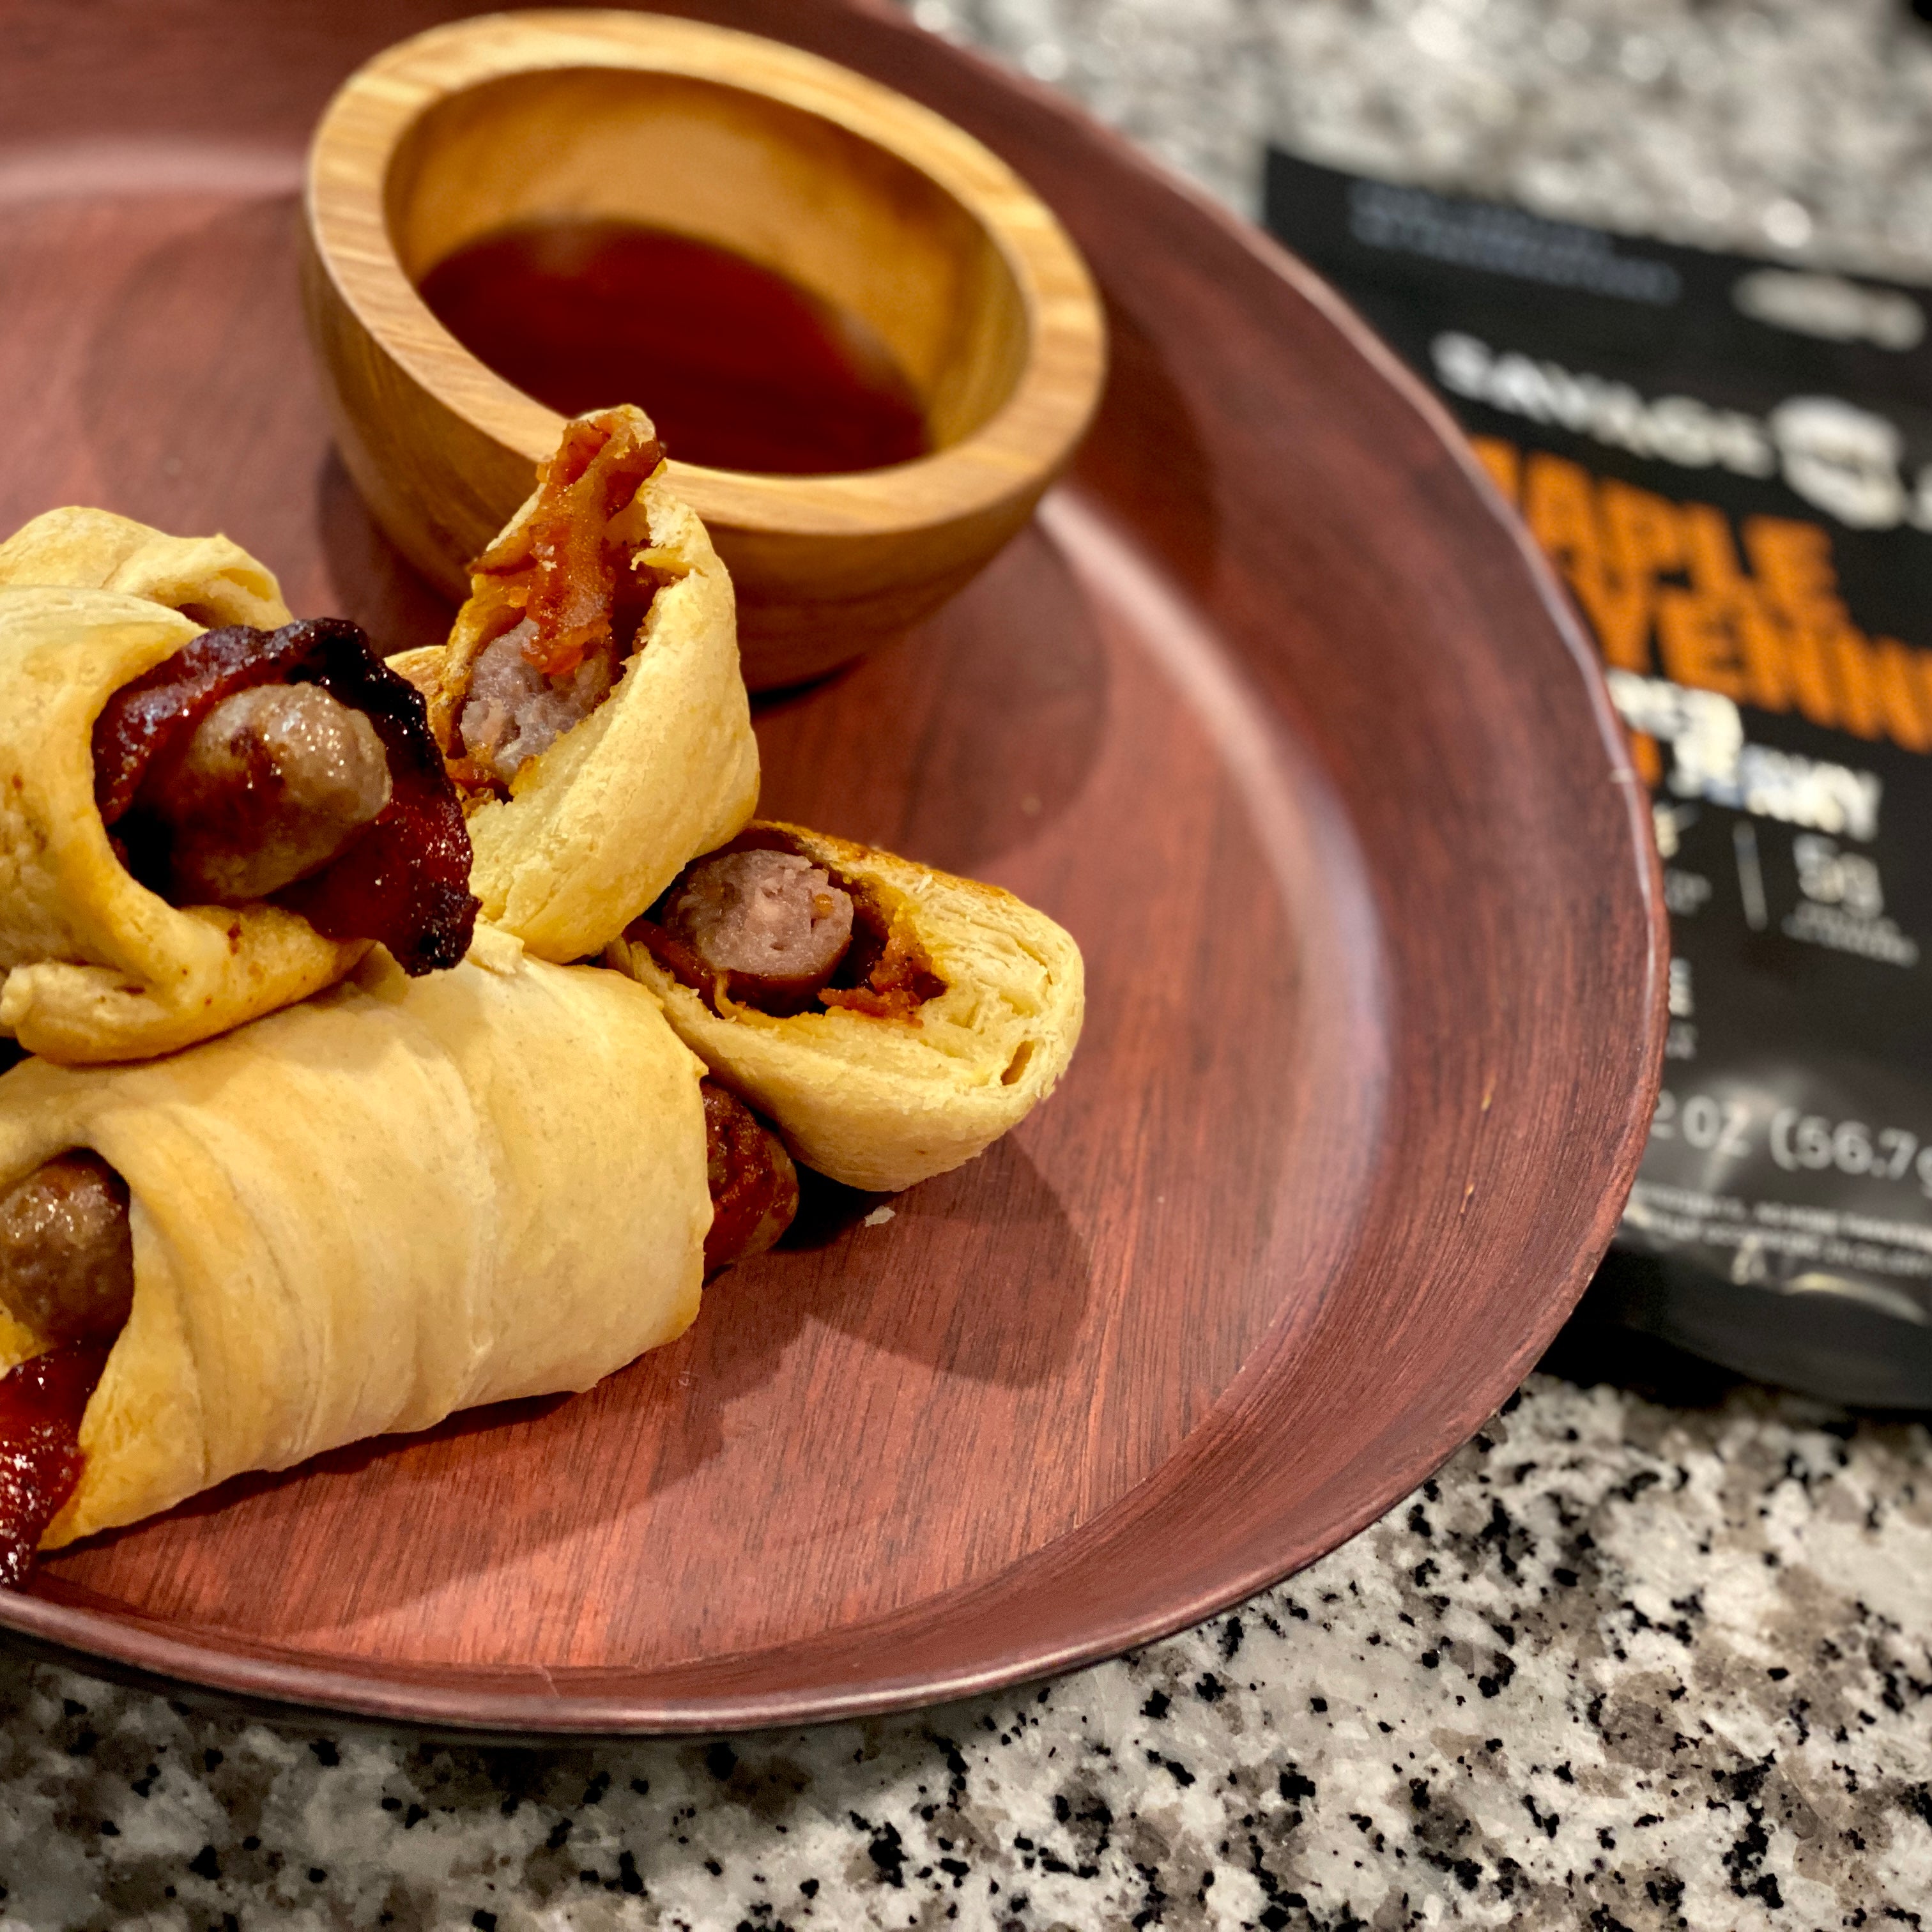 Savage Jerky Bacon-Wrapped Pigs in a Blanket